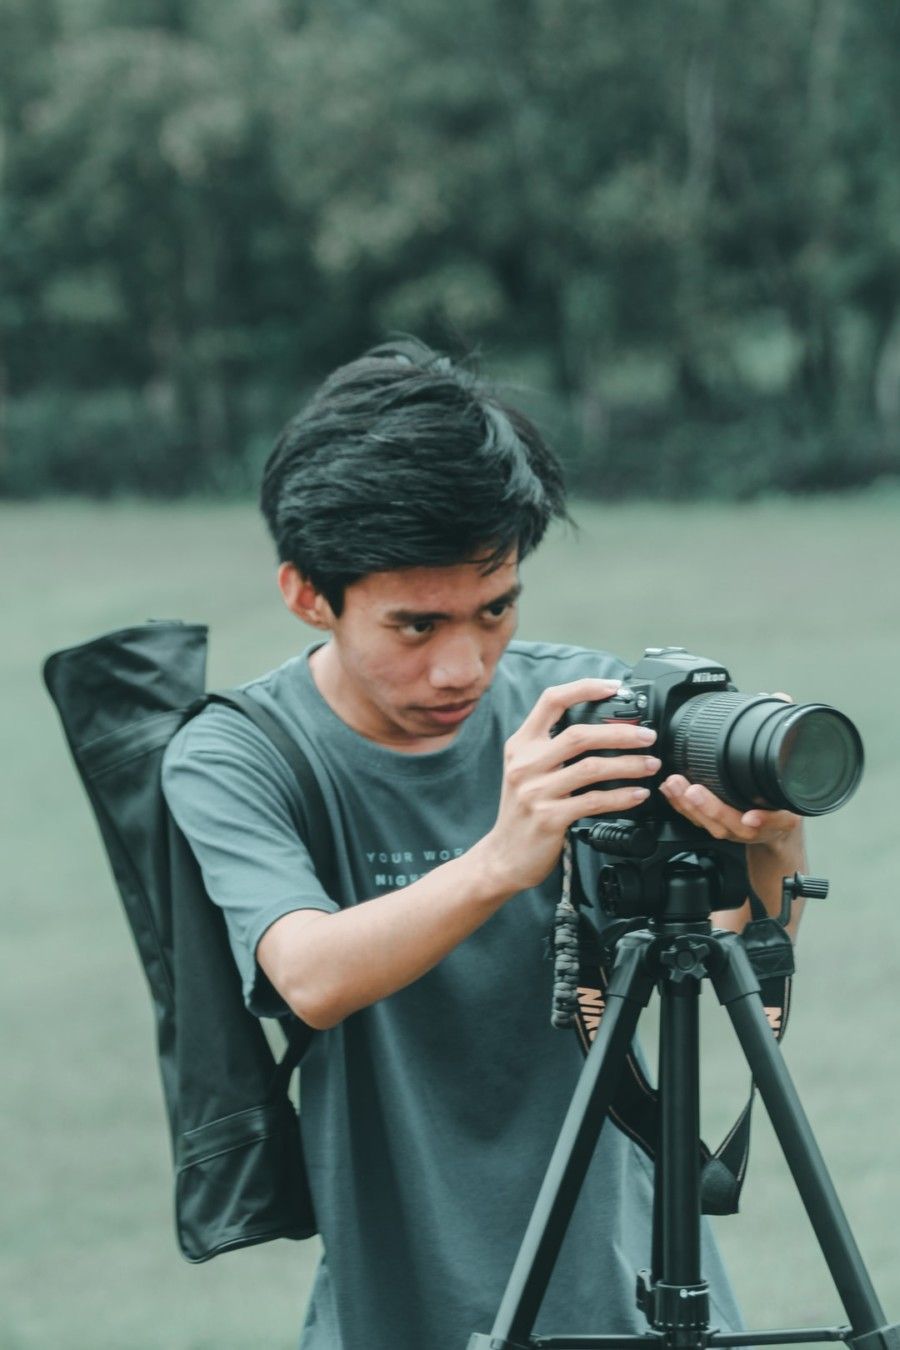 man-using-camera-on-tripod-stand-during-daytime